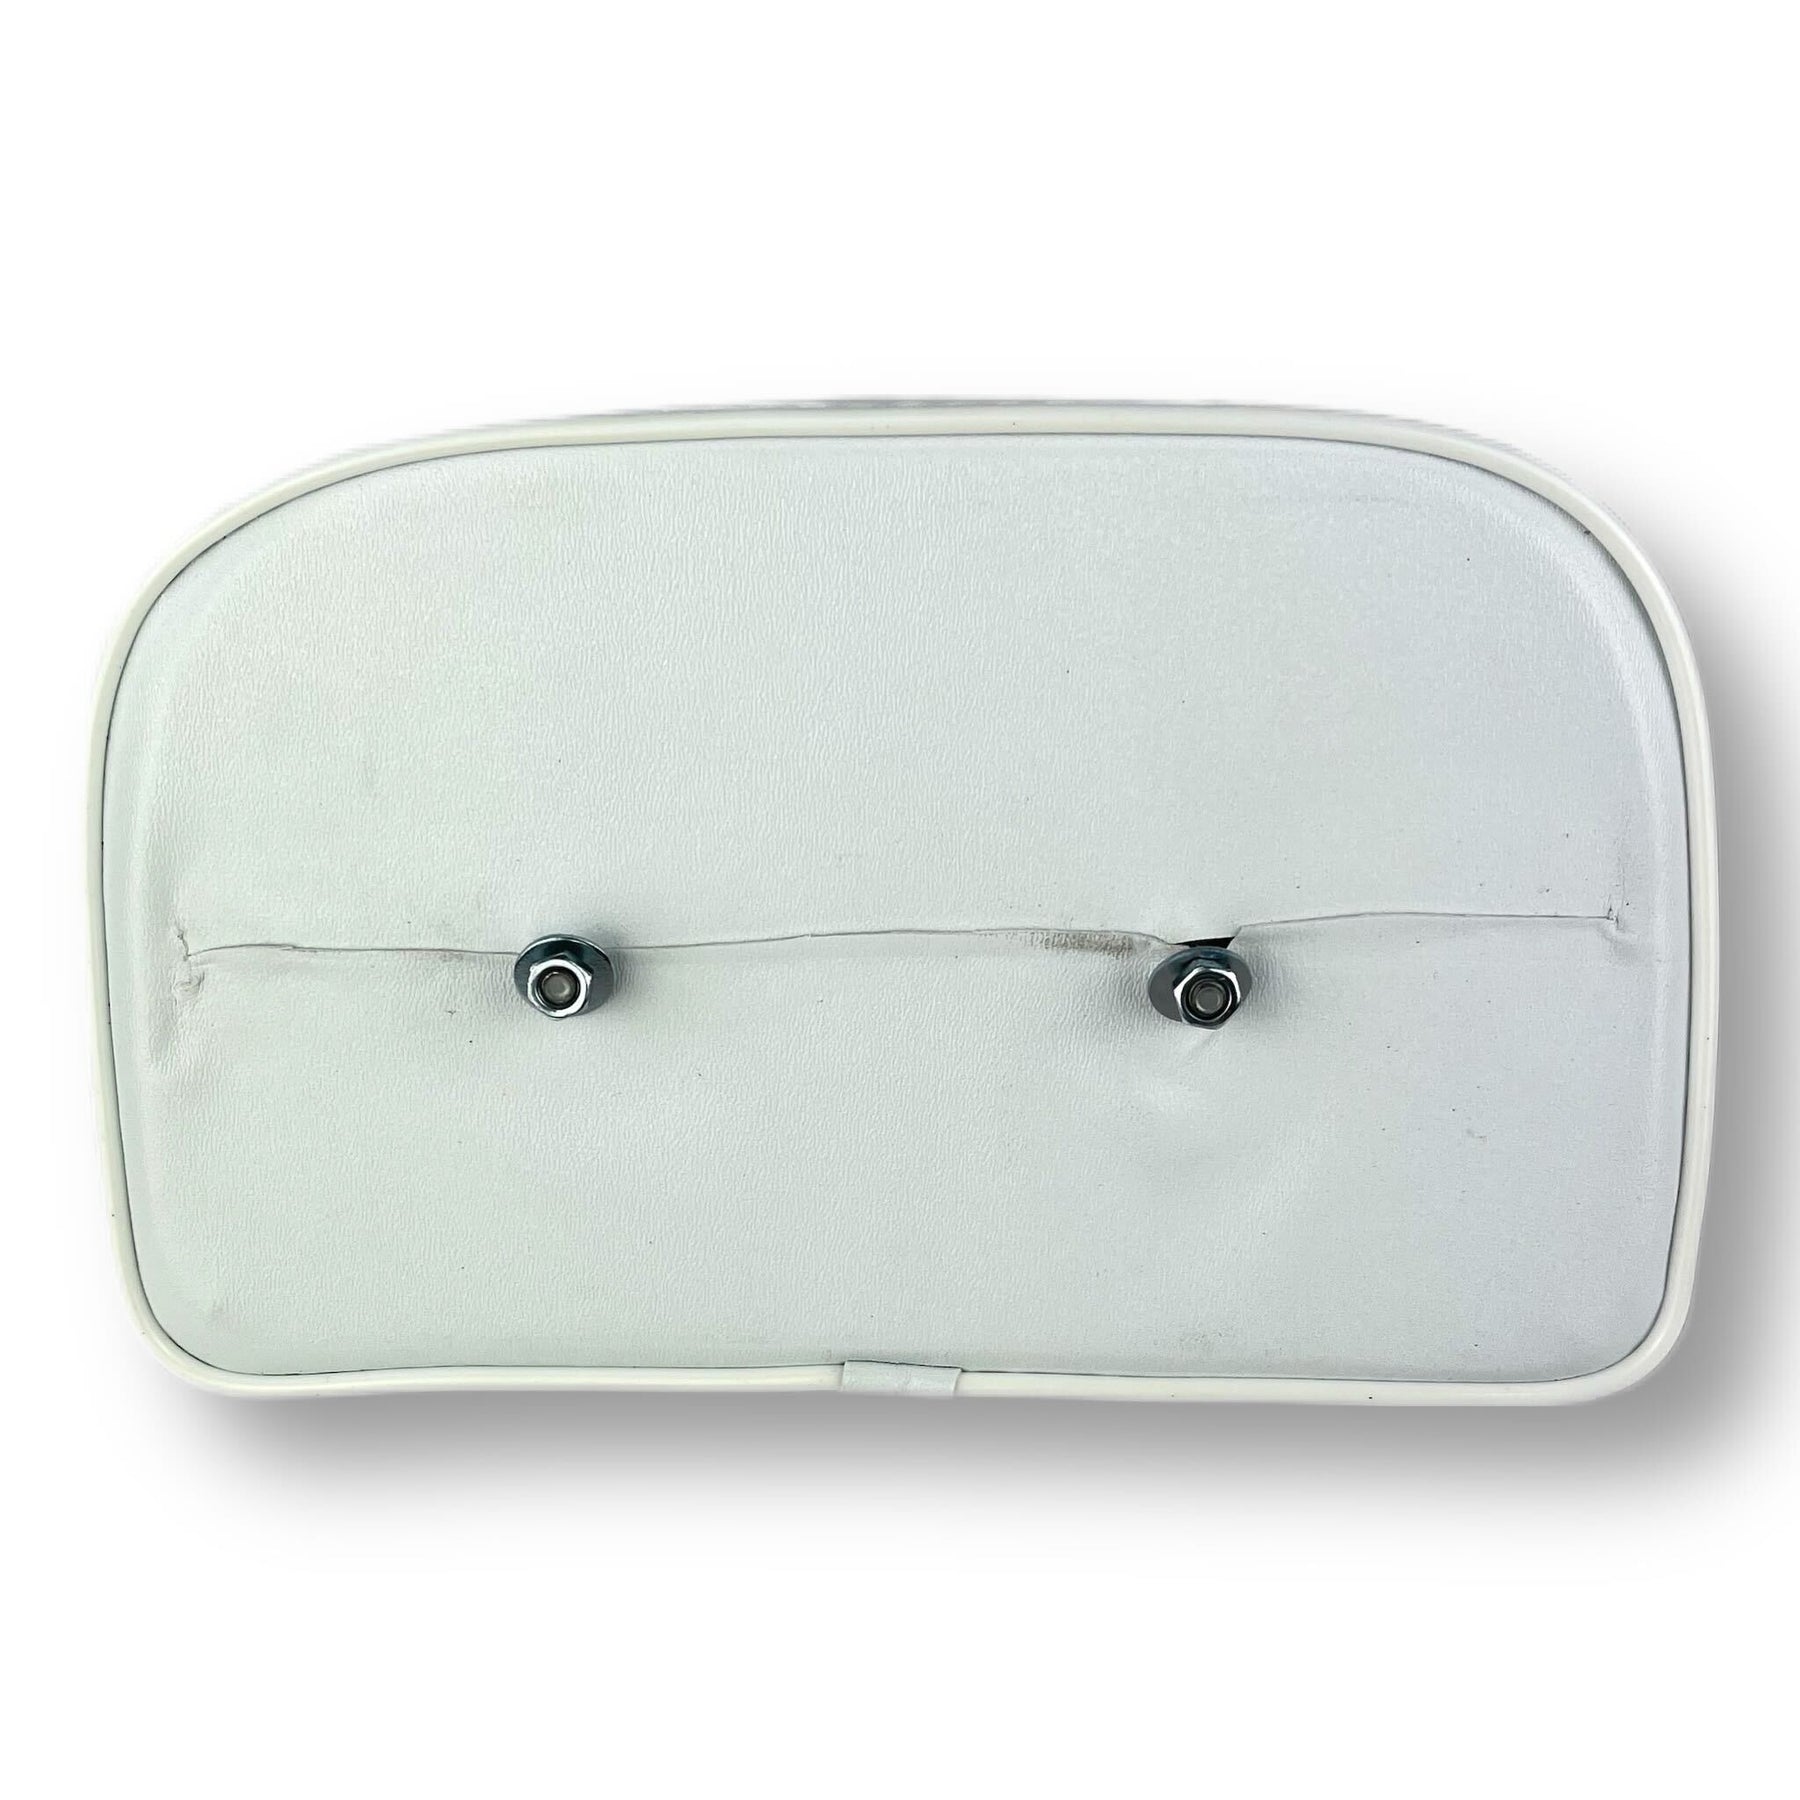 Vespa Lambretta Replacement Backrest Pad For 4 in 1 Stainless Carriers - White